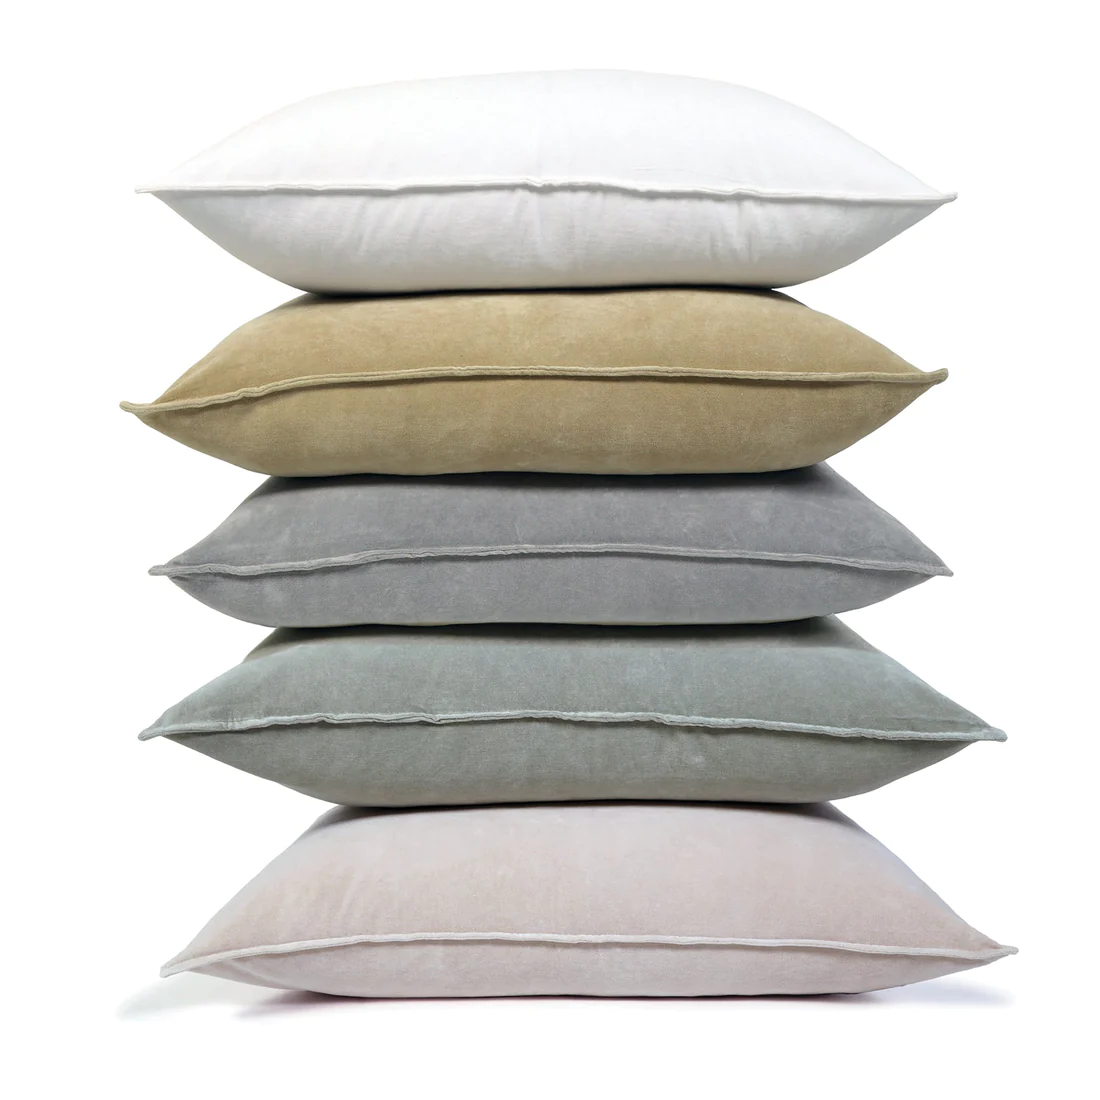 Accent Bed Pillows Archives - GDC Home